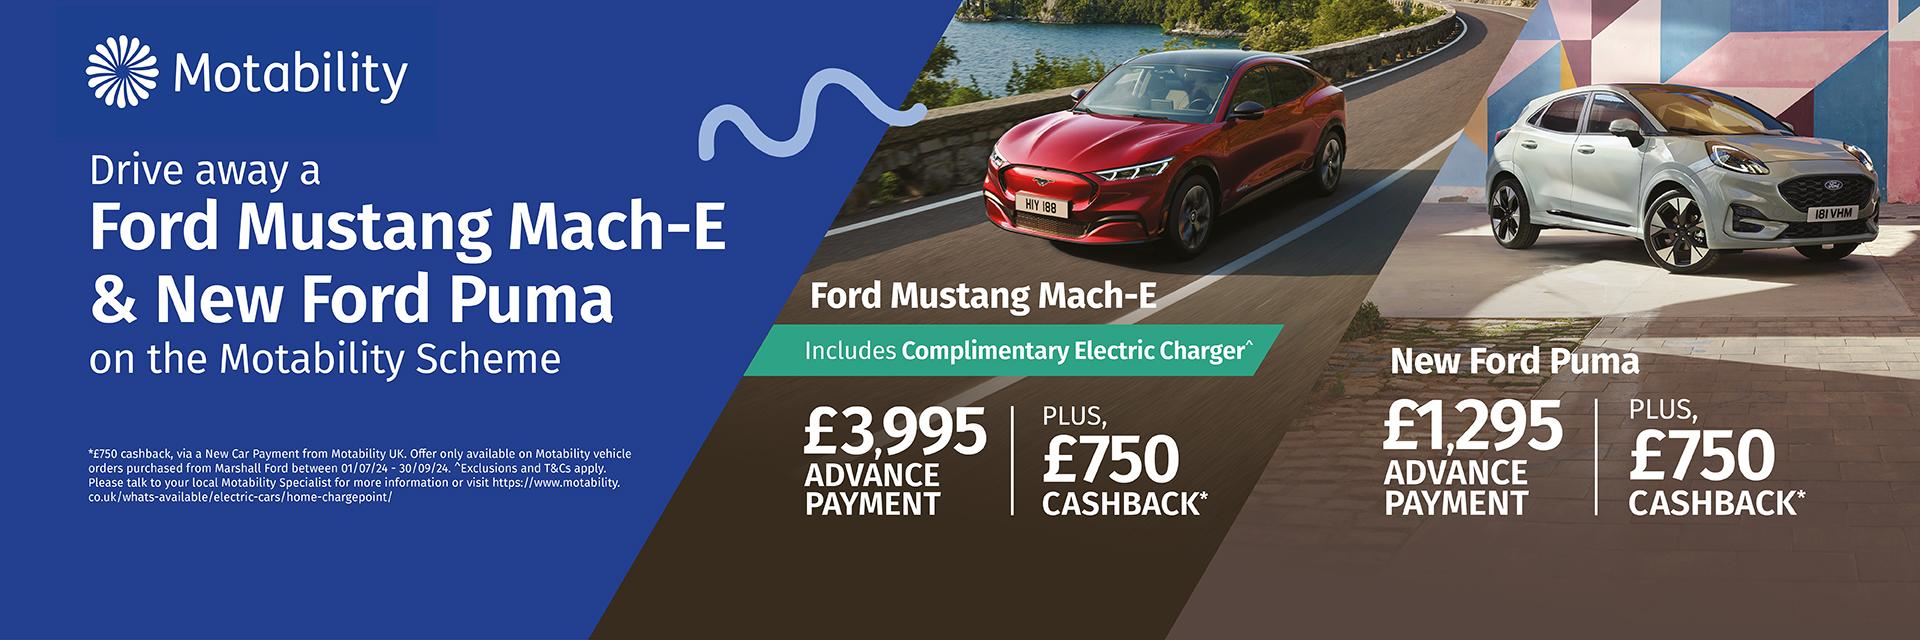 Marshall Ford Motability Offers